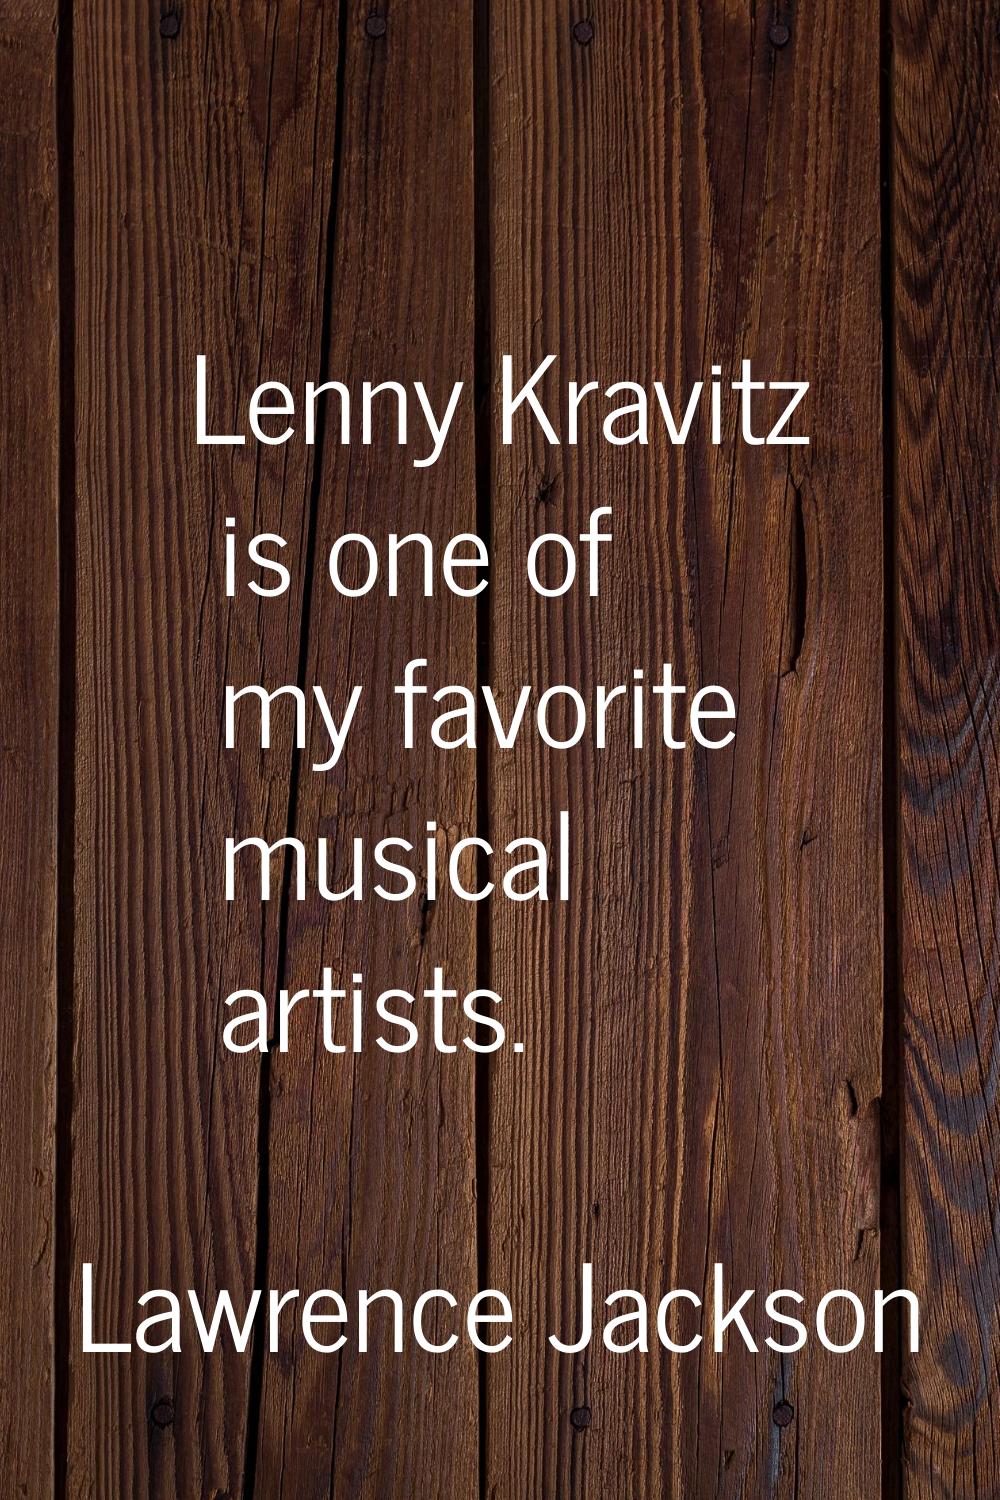 Lenny Kravitz is one of my favorite musical artists.